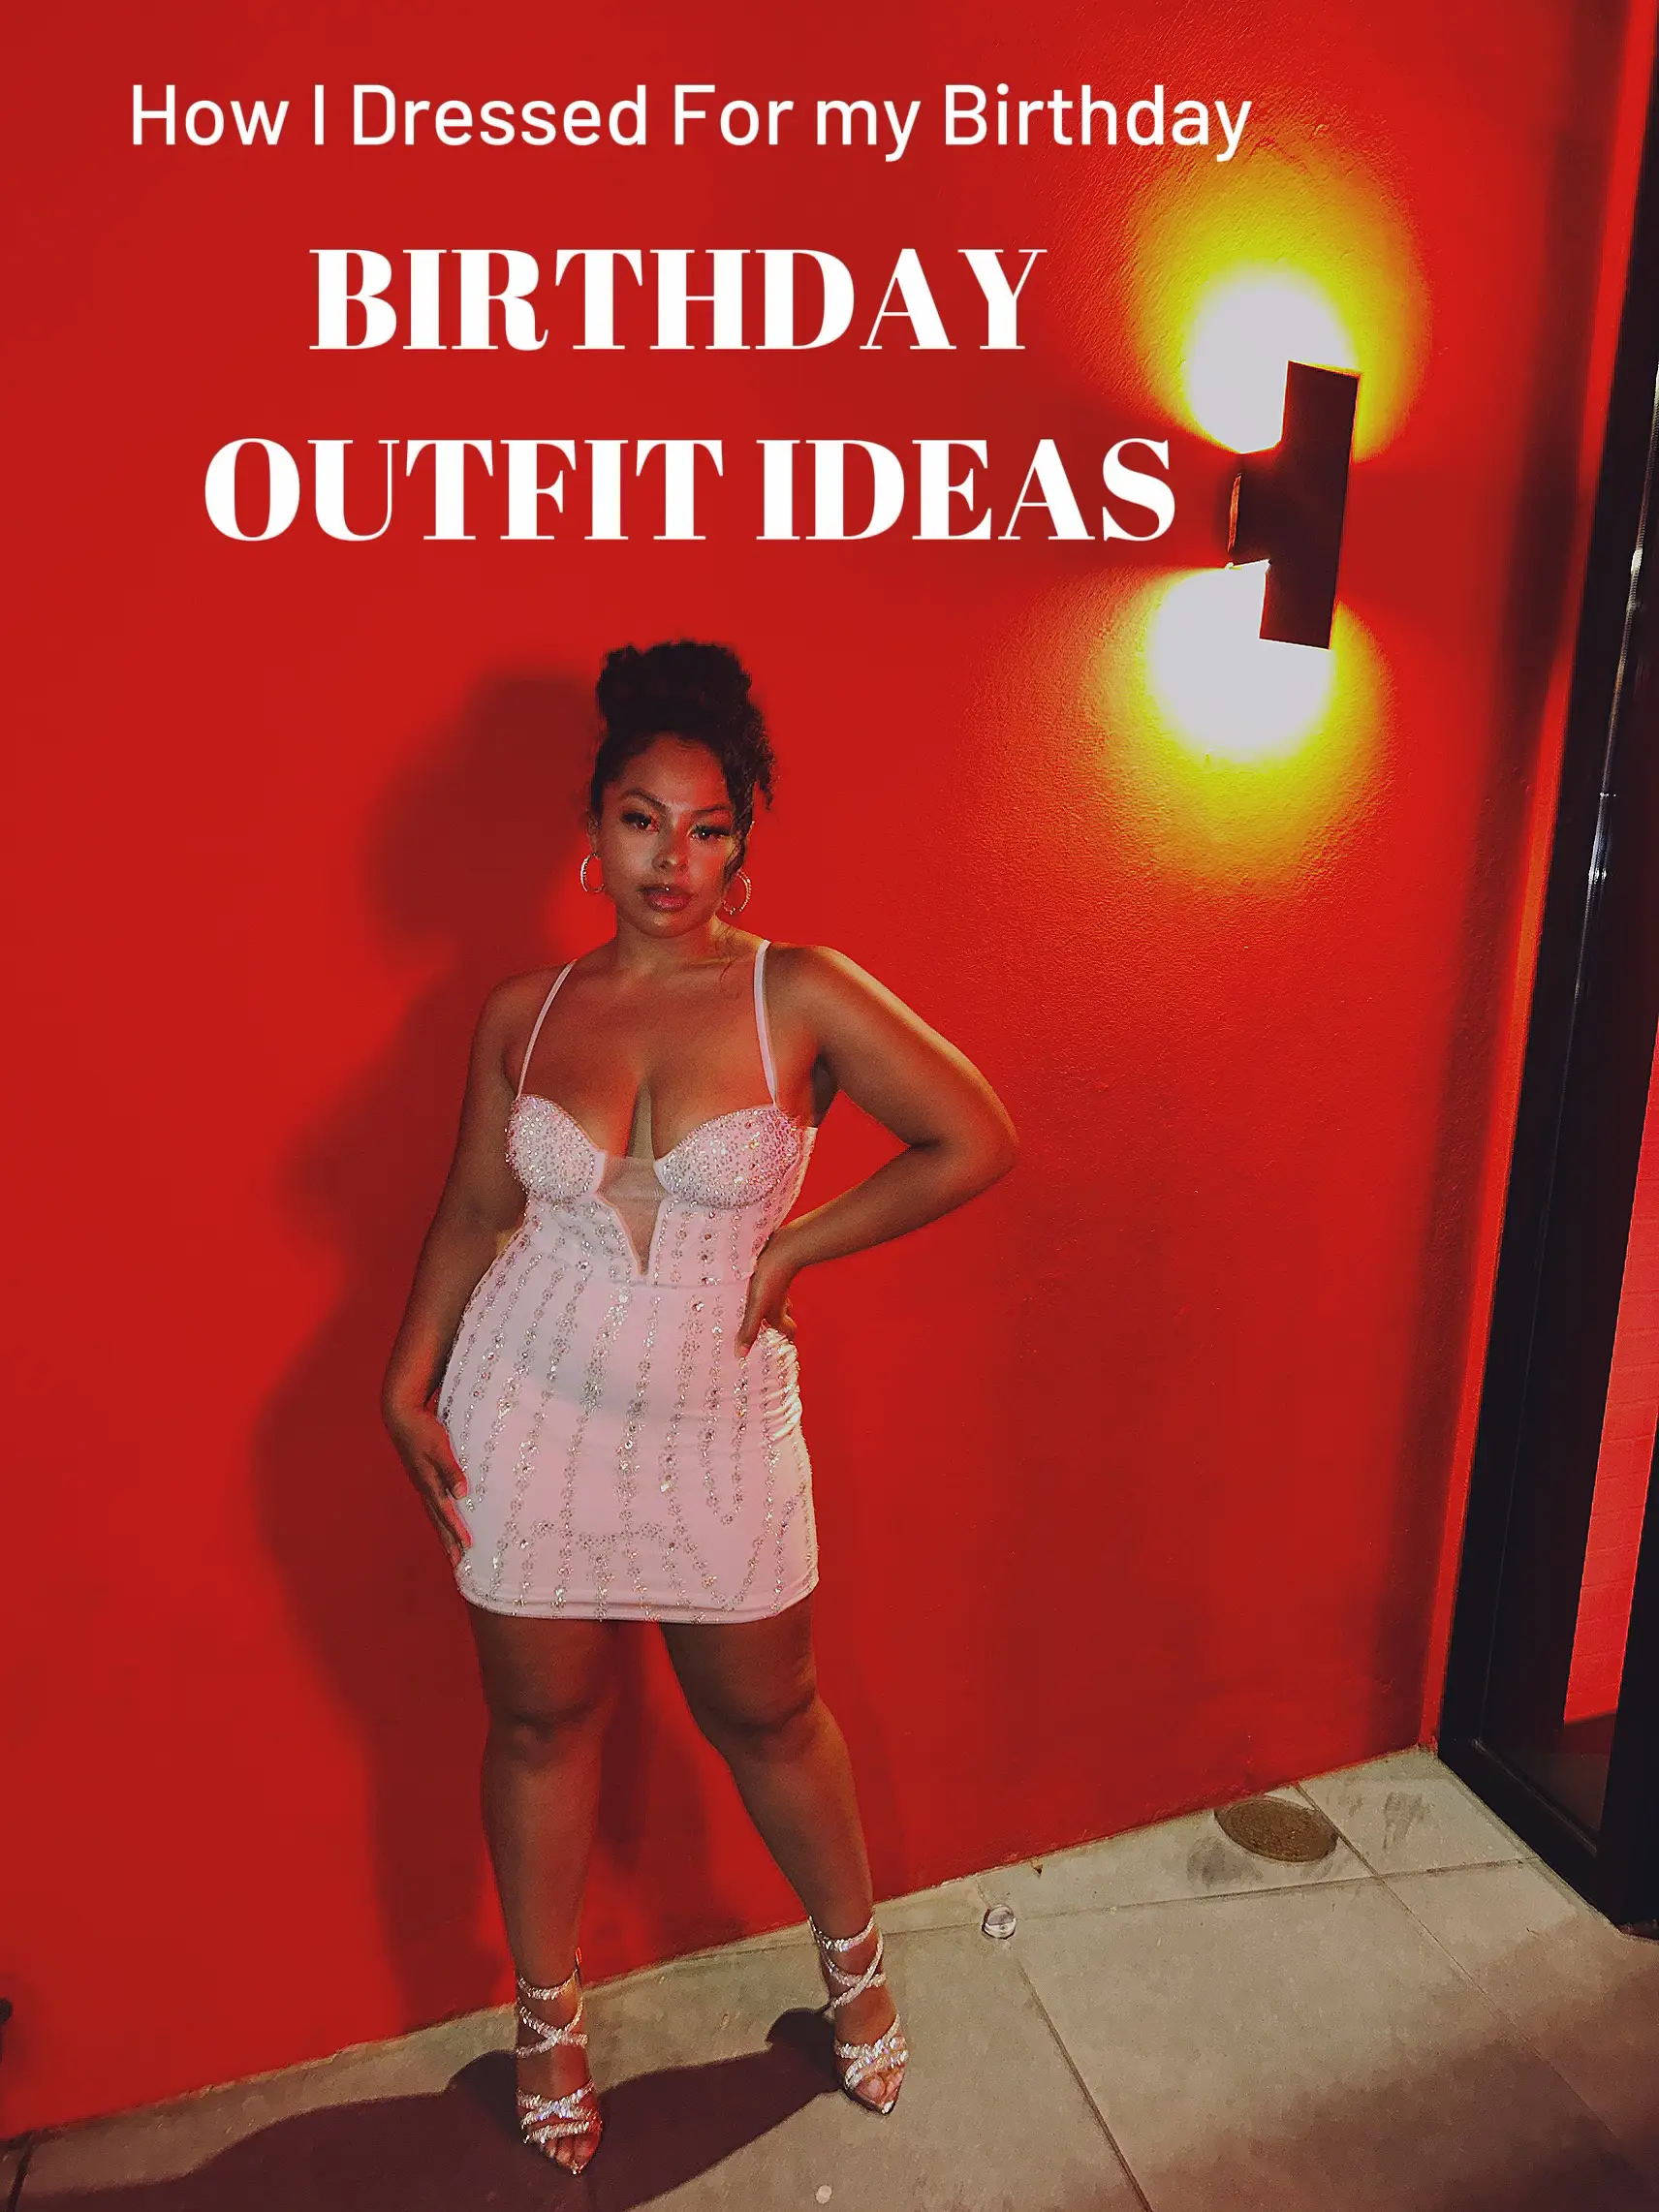 100+ FORMAL OUTFIT IDEAS  21st birthday outfits, 21st birthday photoshoot,  Cute birthday outfits